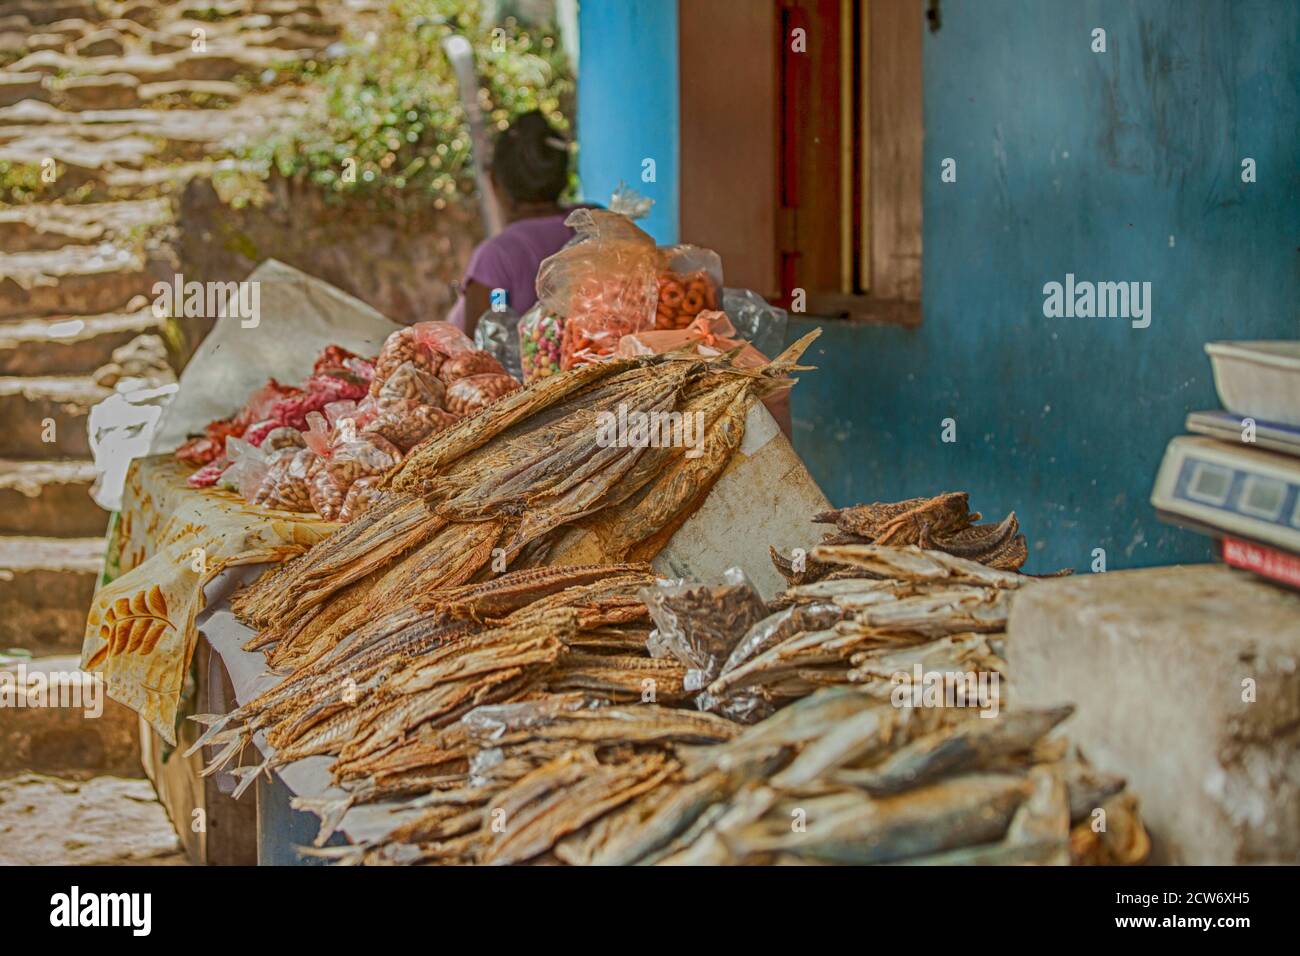 Selling dried fish on a market stall in Sri Lanka Stock Photo